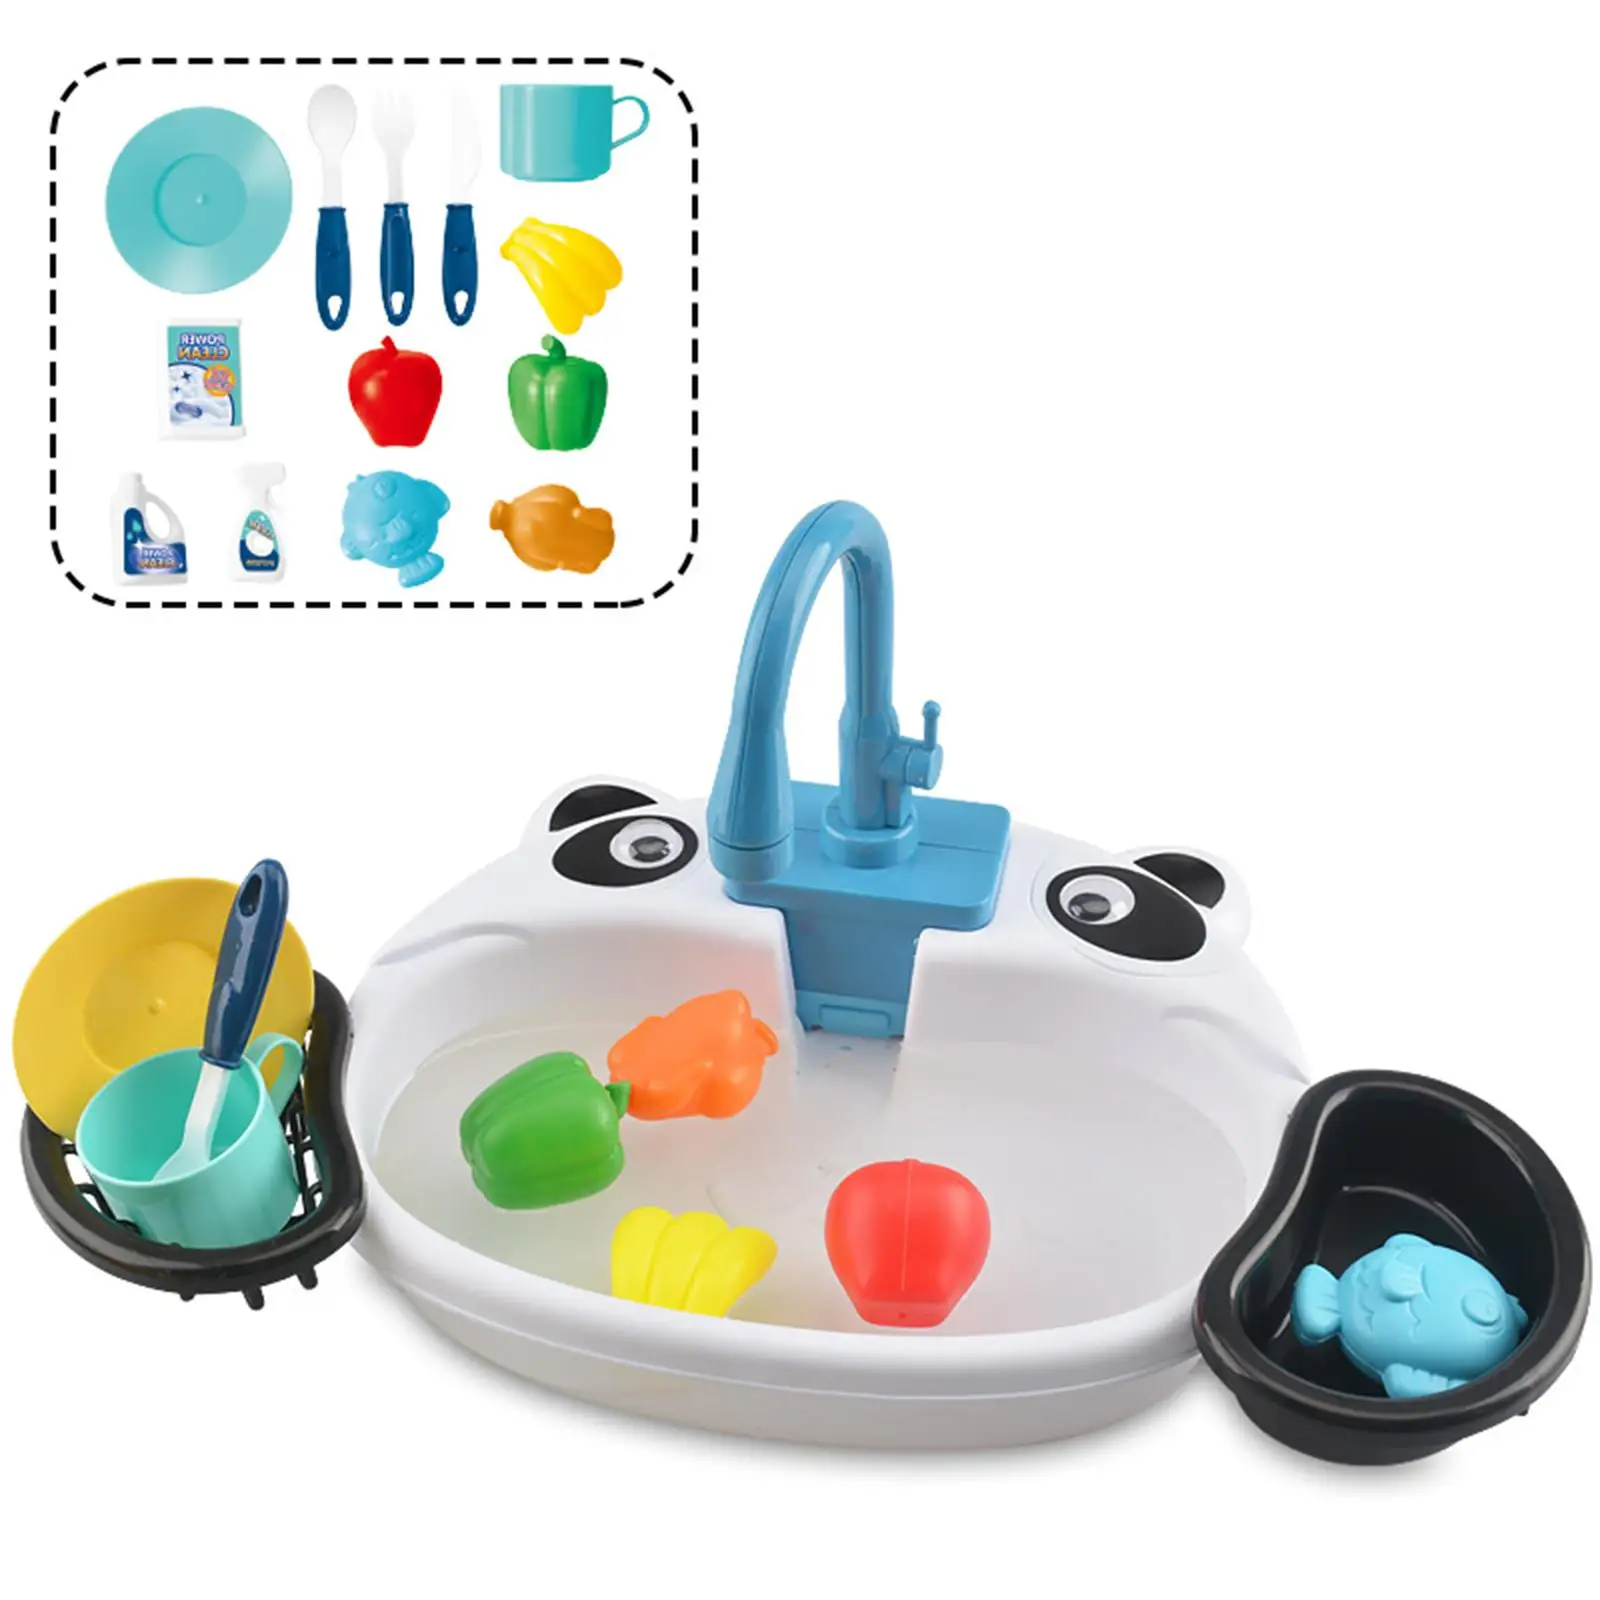 Pretend Play Sink Toys, with Running Water Simulated Sink Dishwashing Set  for Boys and Girls Kids Toddlers Children Birthday